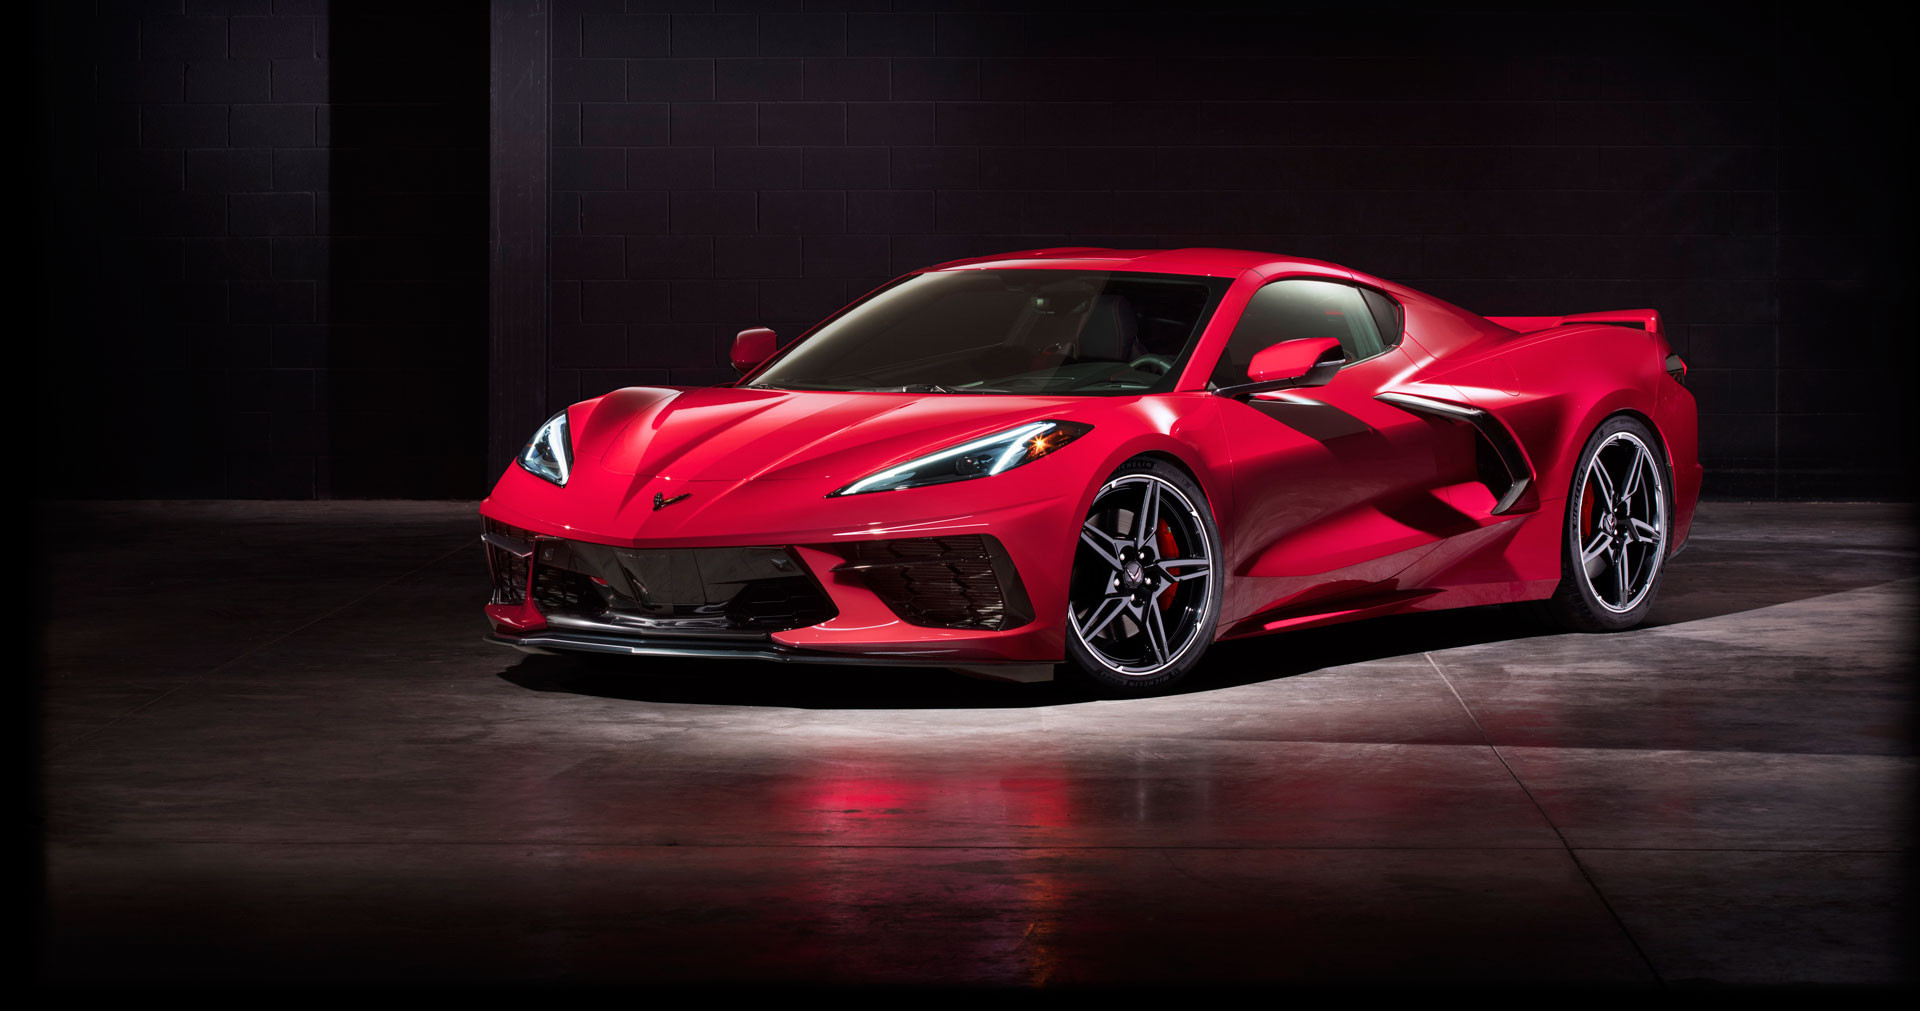 2020 Chevy Corvette in red